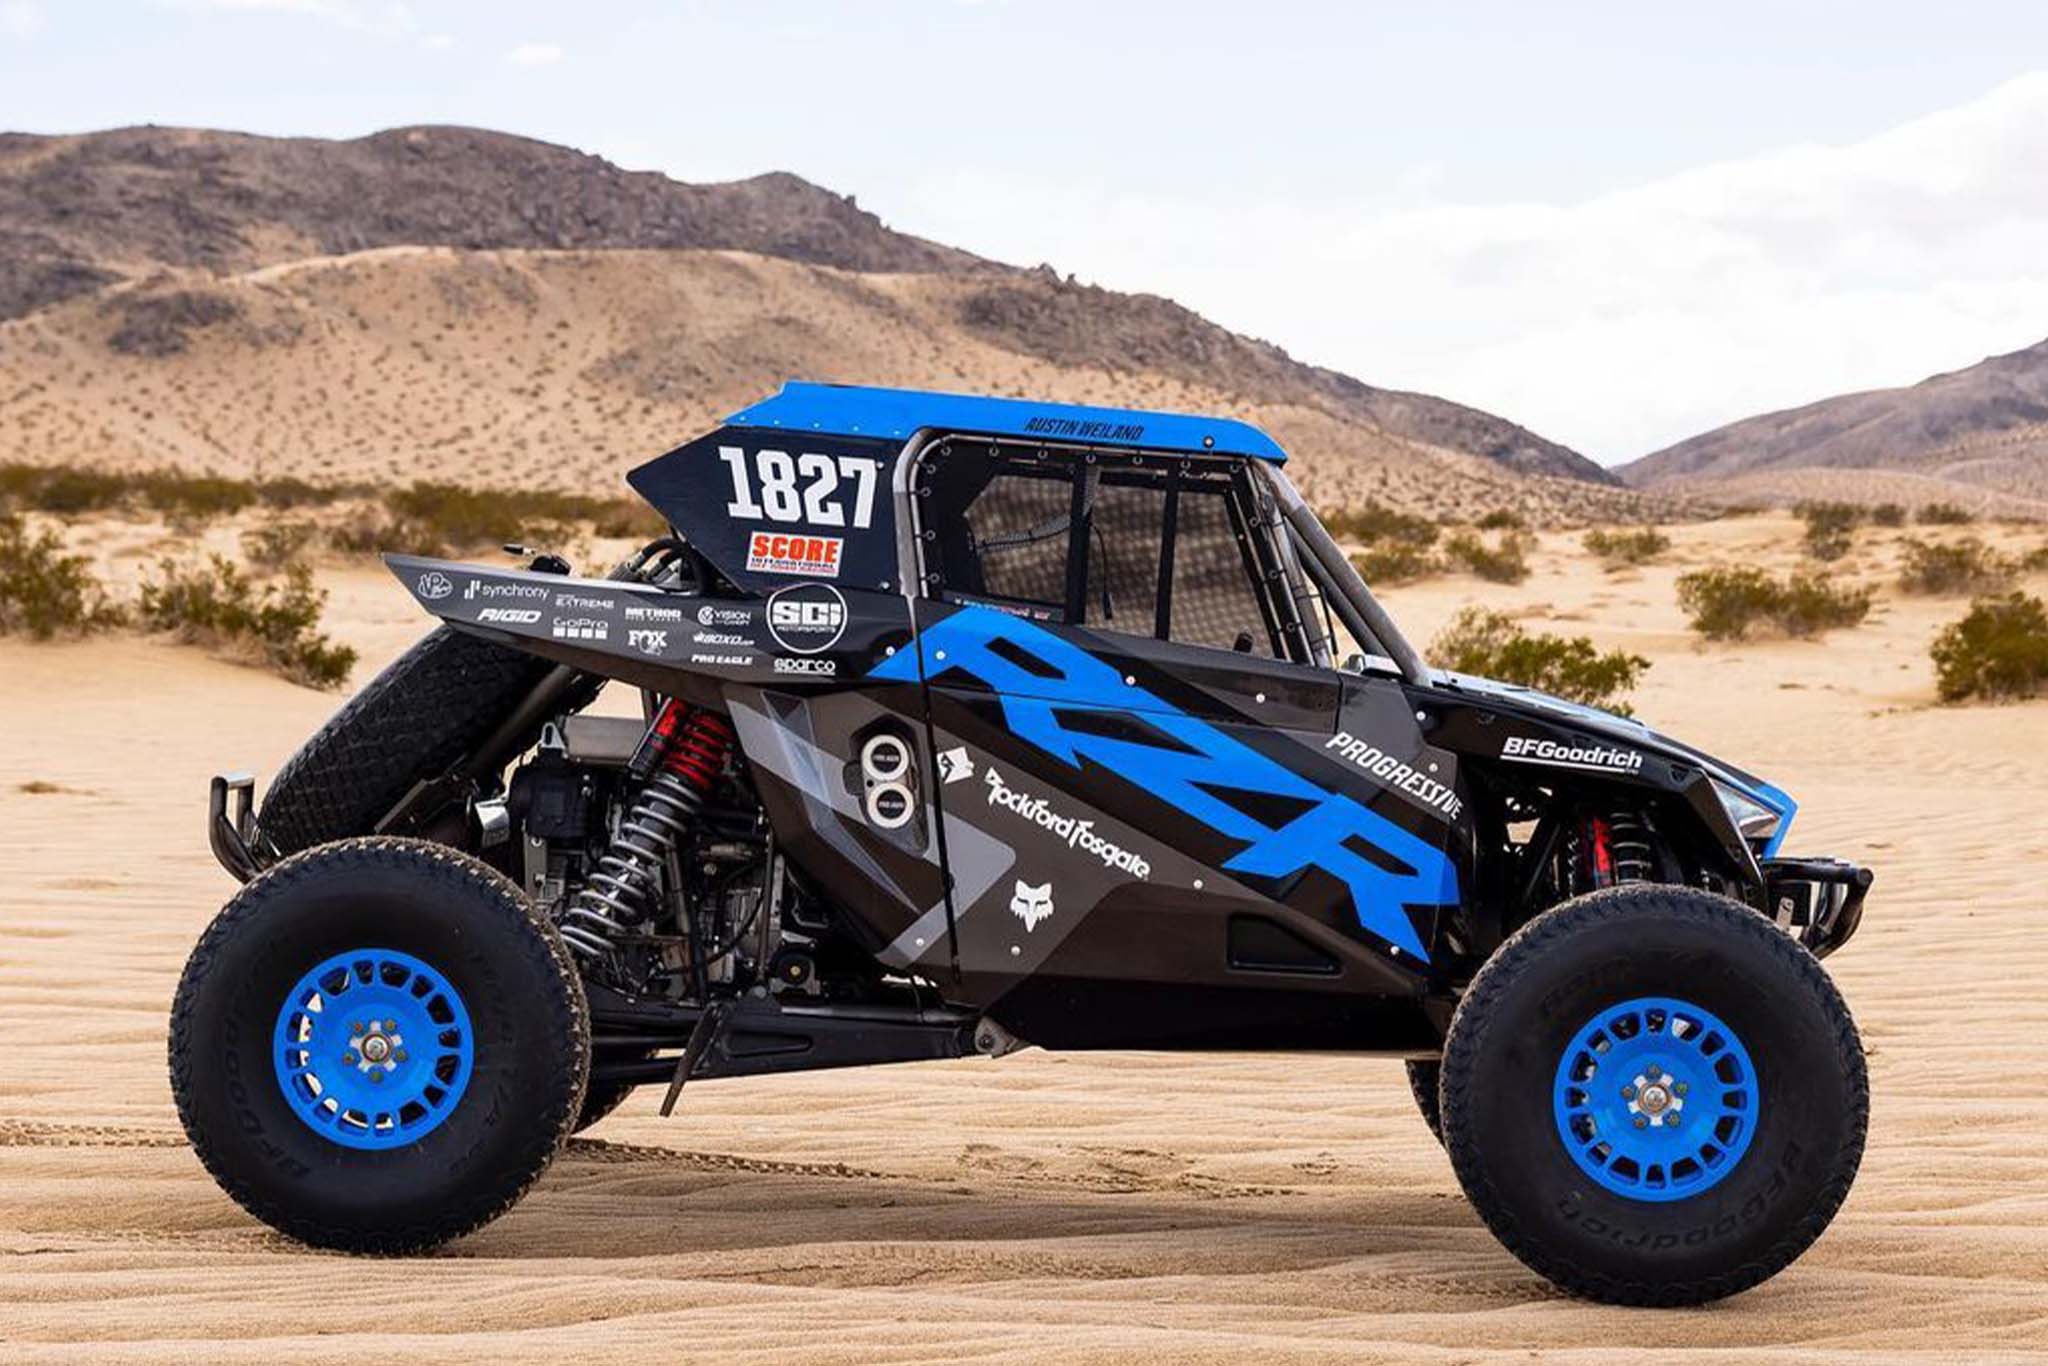 Polaris RZR Pro R Factory Racer Will Stomp Over Everything With 35-Inch Tires, 225 HP